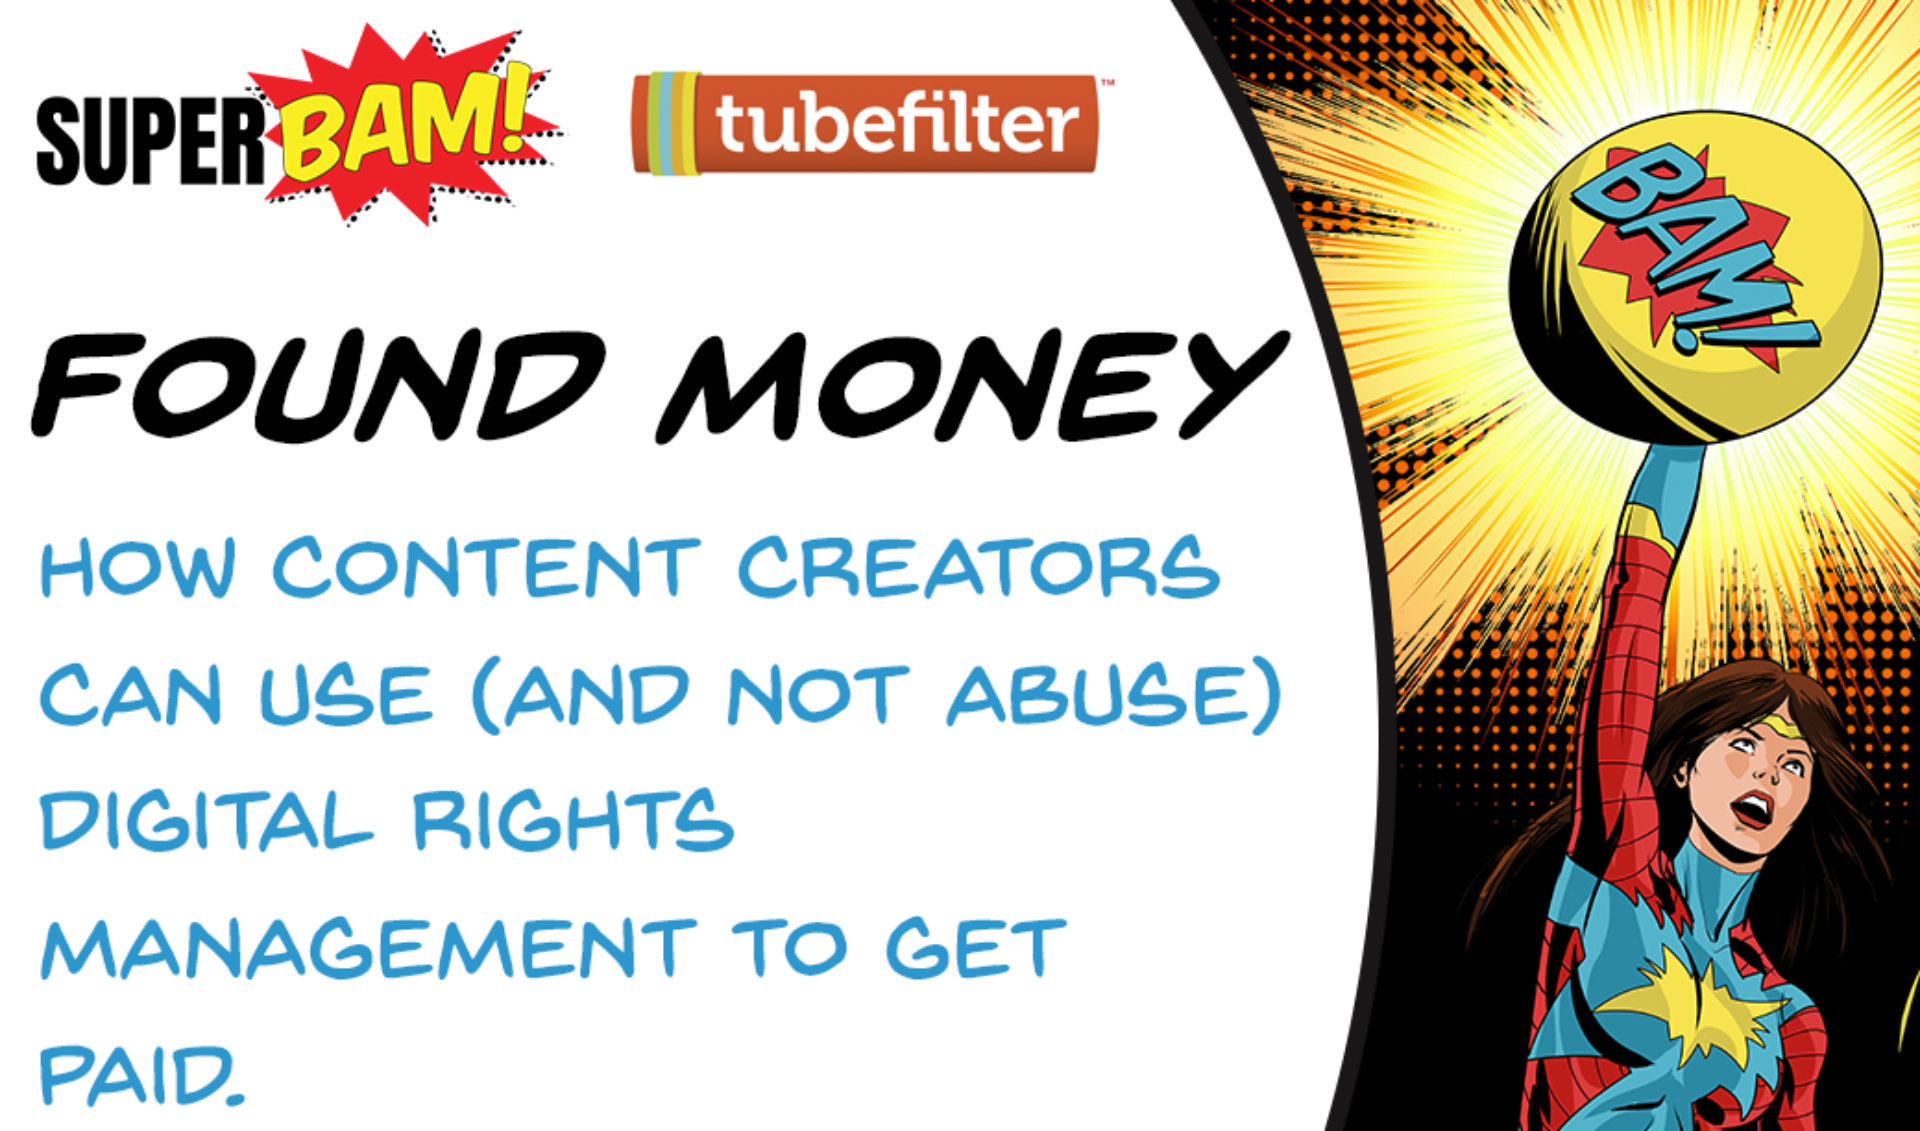 Tubefilter Meetup: Found Money—How Creators Can Use (And Not Abuse) Digital Rights Management To Get Paid